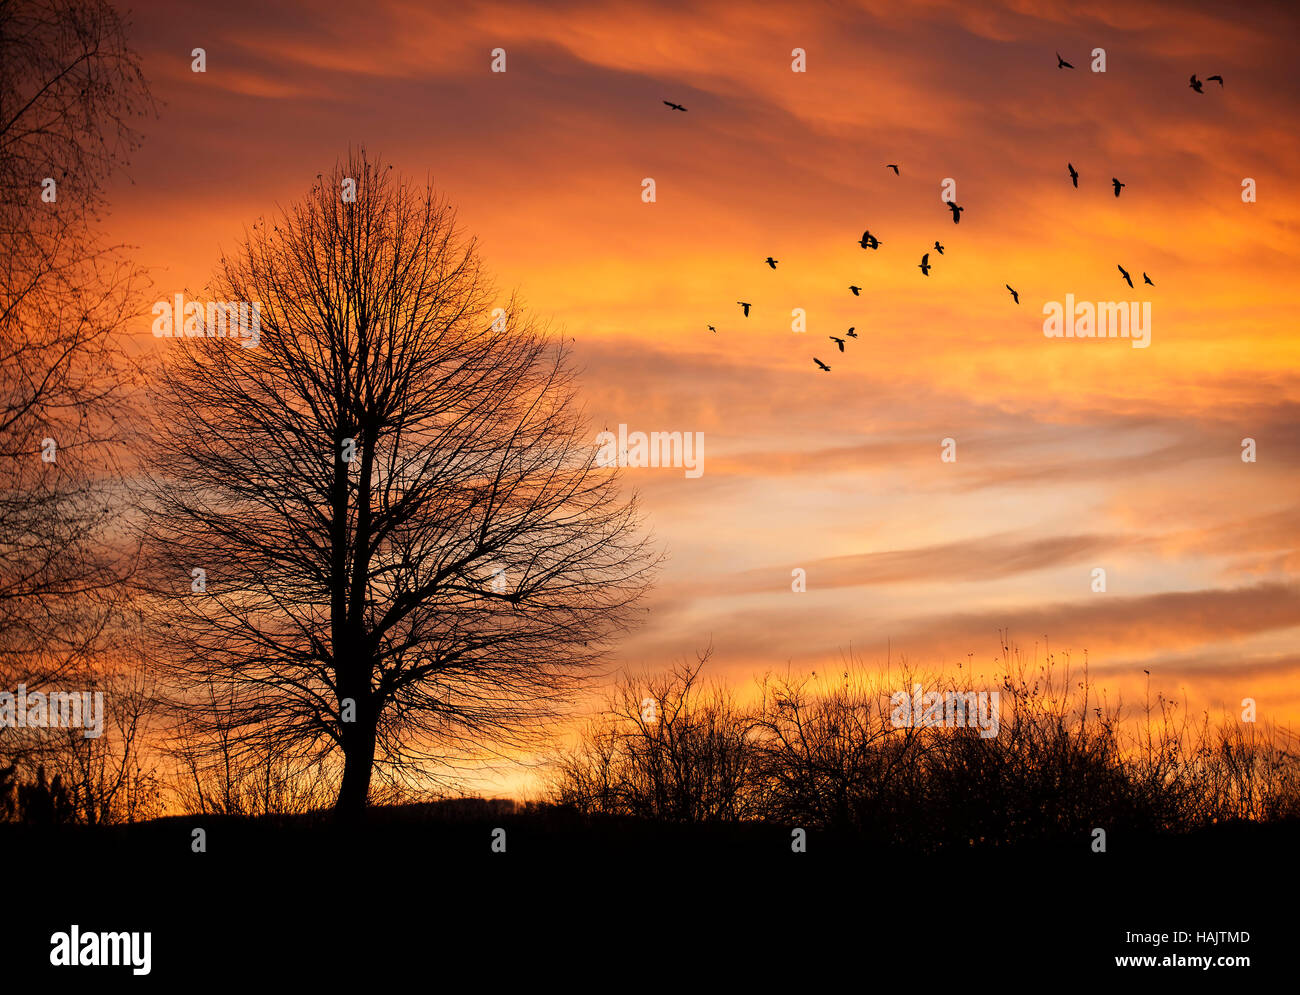 Tree in sunset time with flying birds. Stock Photo